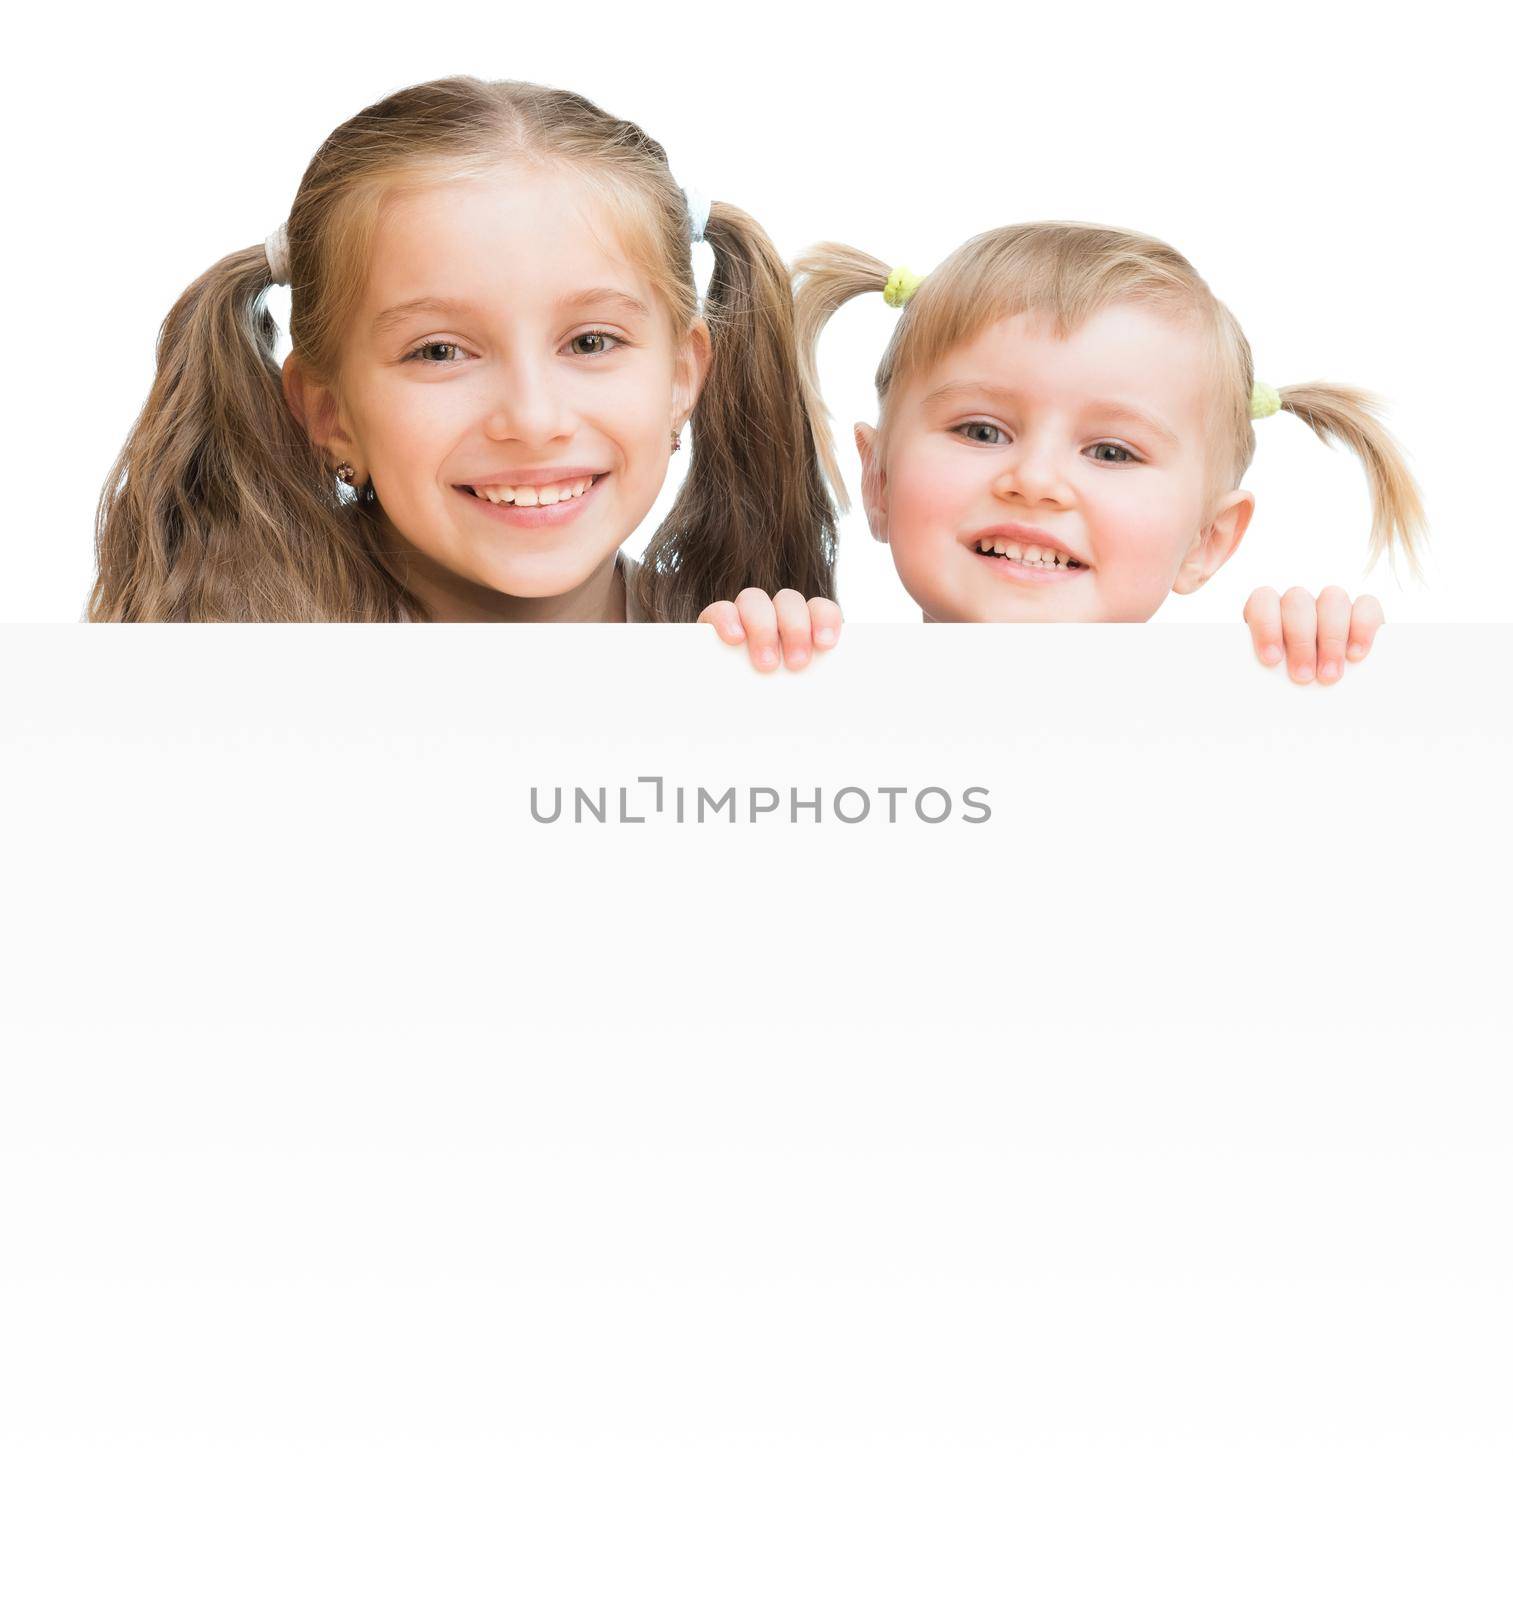 Beautiful sisters with board isolated on a white background